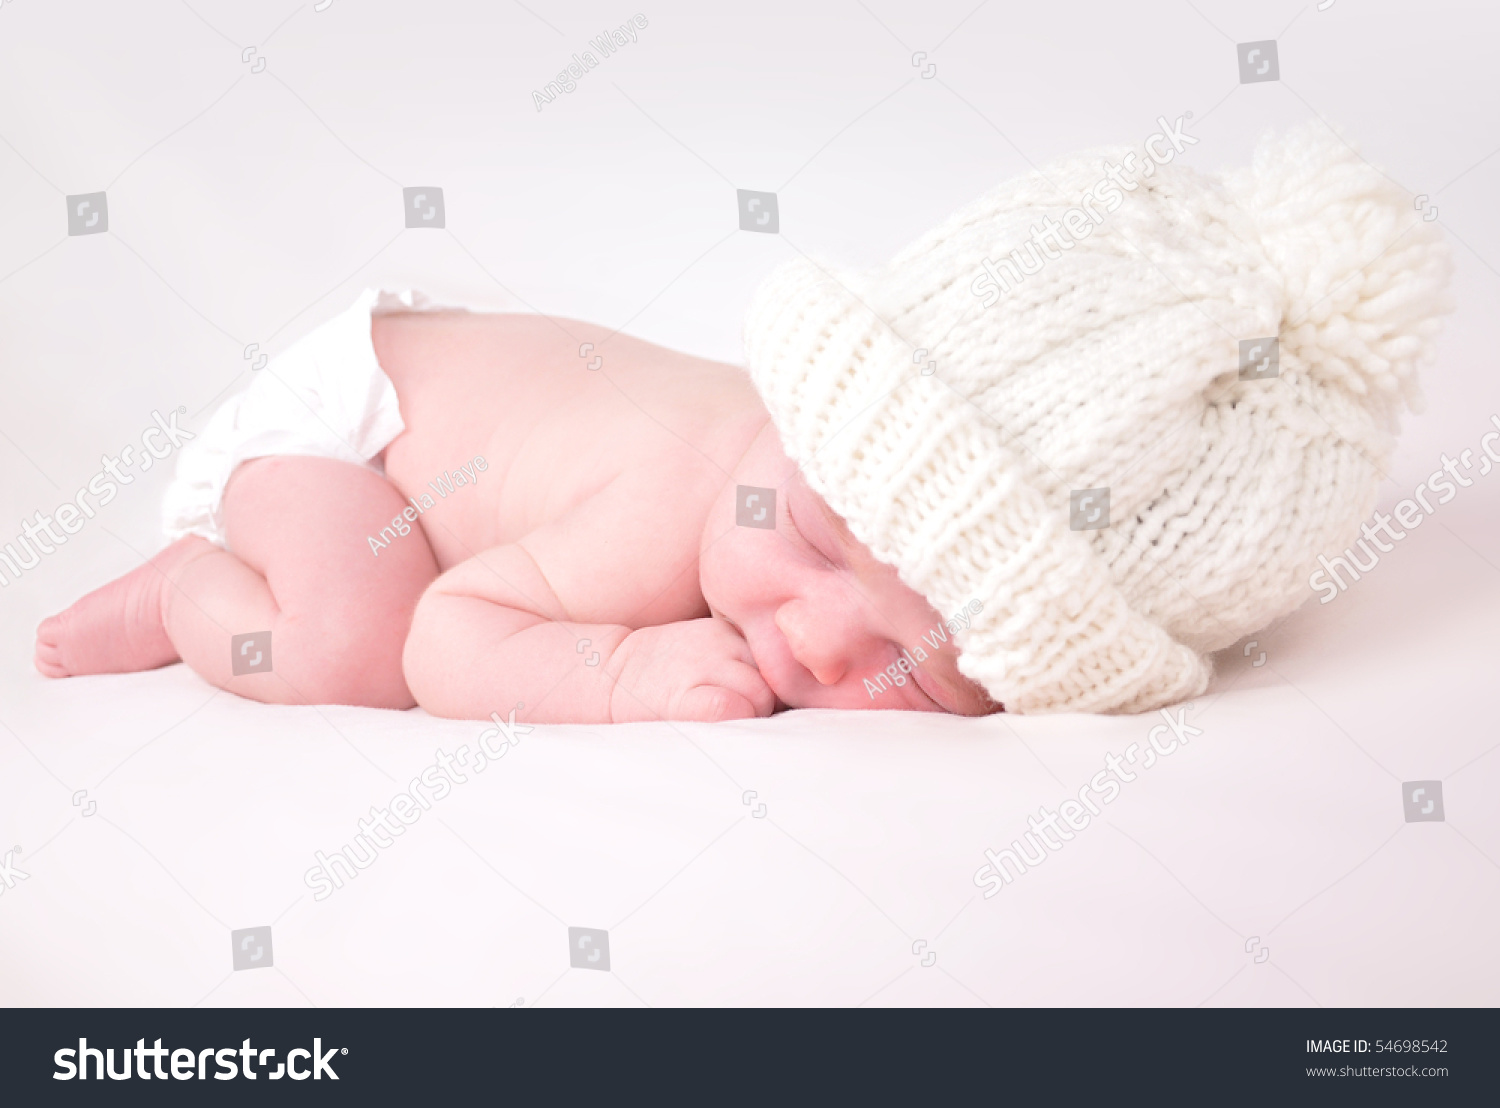 A newborn baby is wearing a white hat and laying down sleeping on a soft white background. Use the photo to represent life, parenting or childhood. #54698542